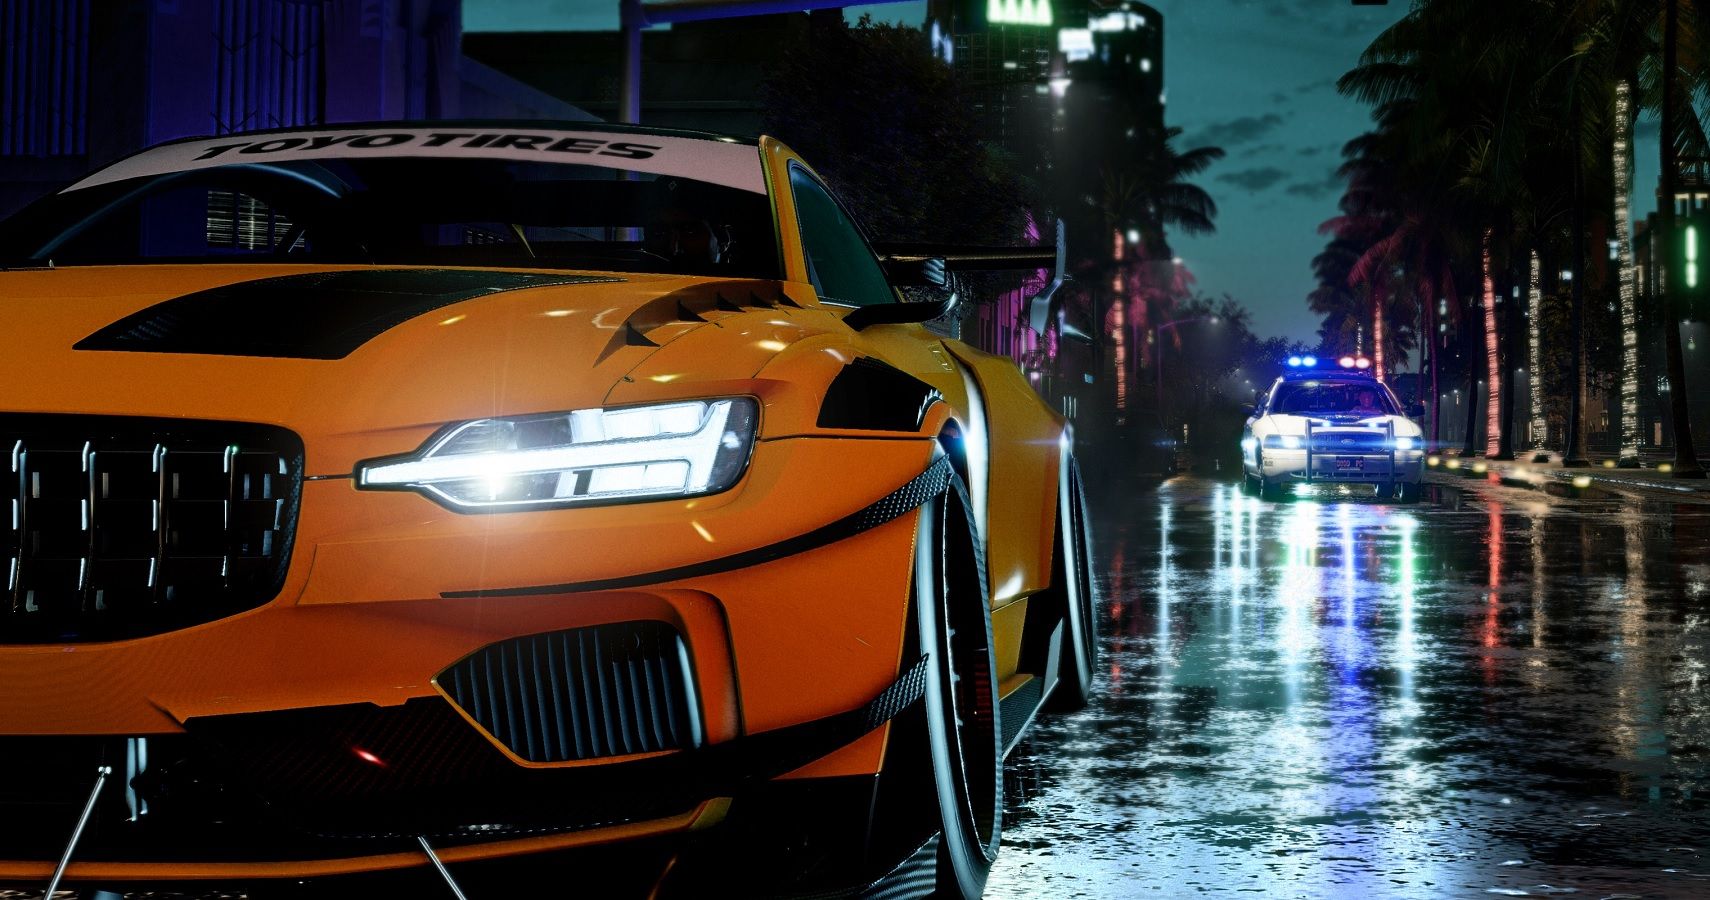 download free need for speed unbound xbox one